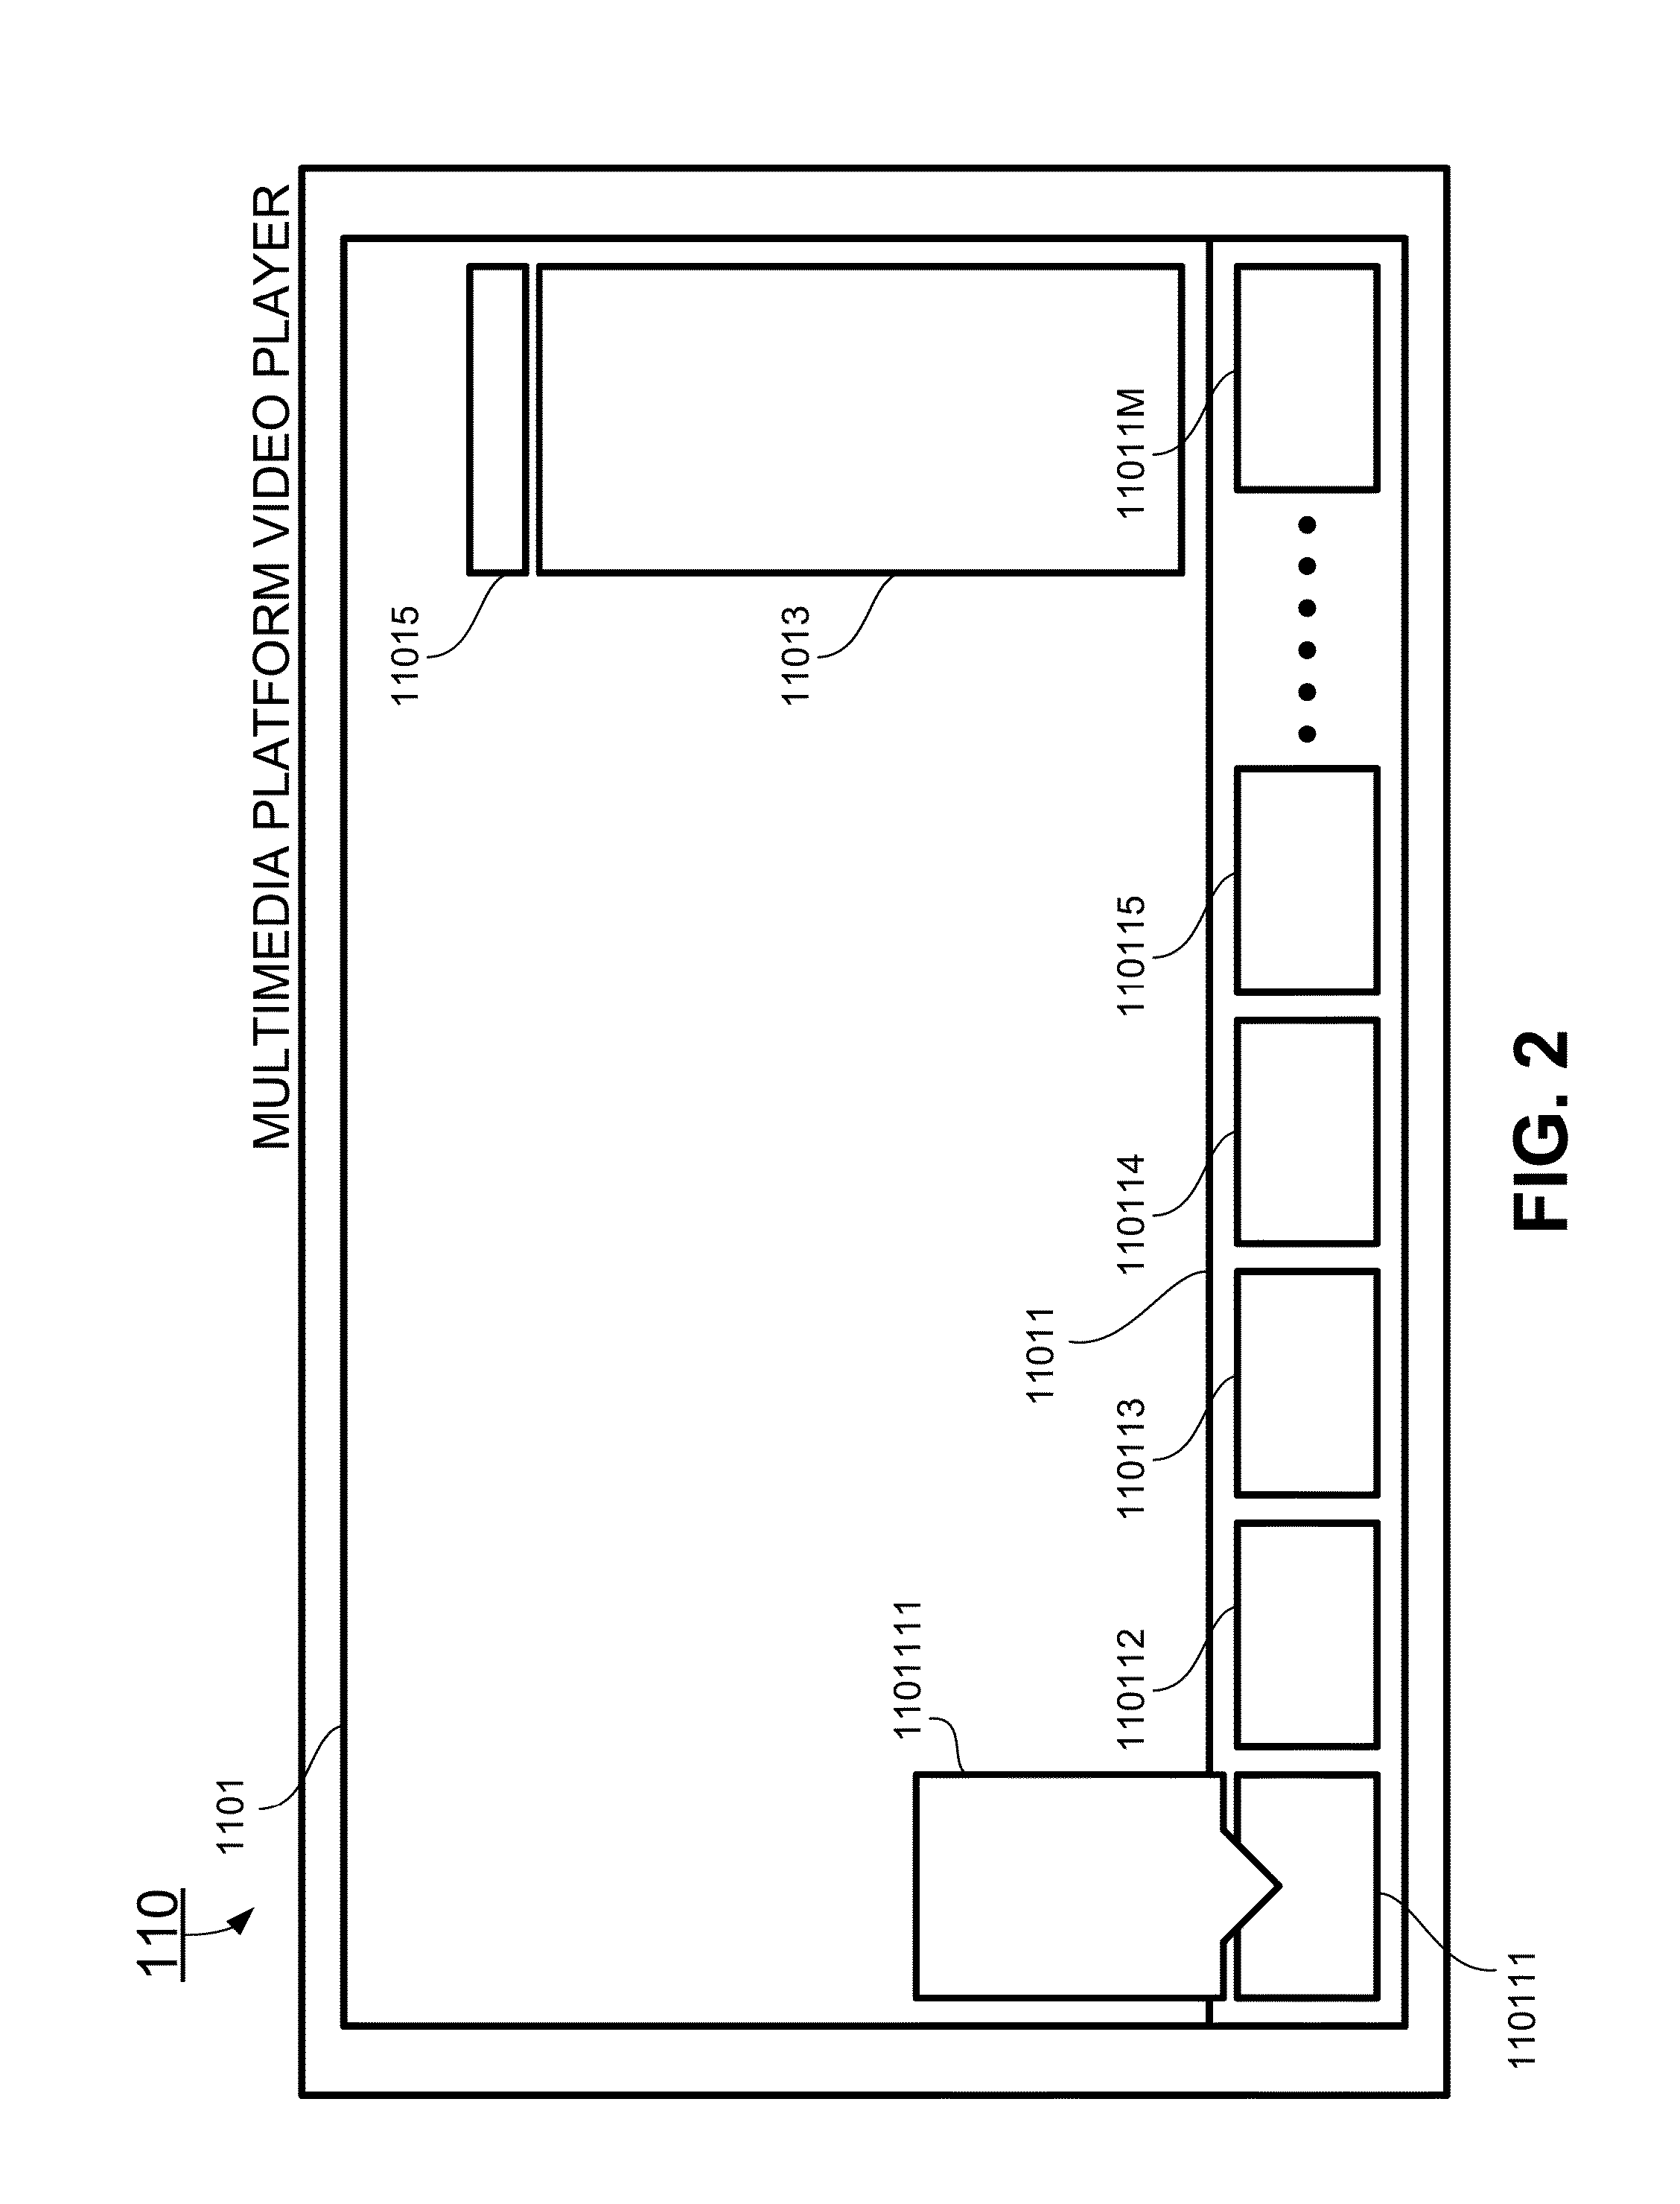 System and method for distributing and managing multiple content feeds and supplemental content by content provider using an on-screen literactive interface